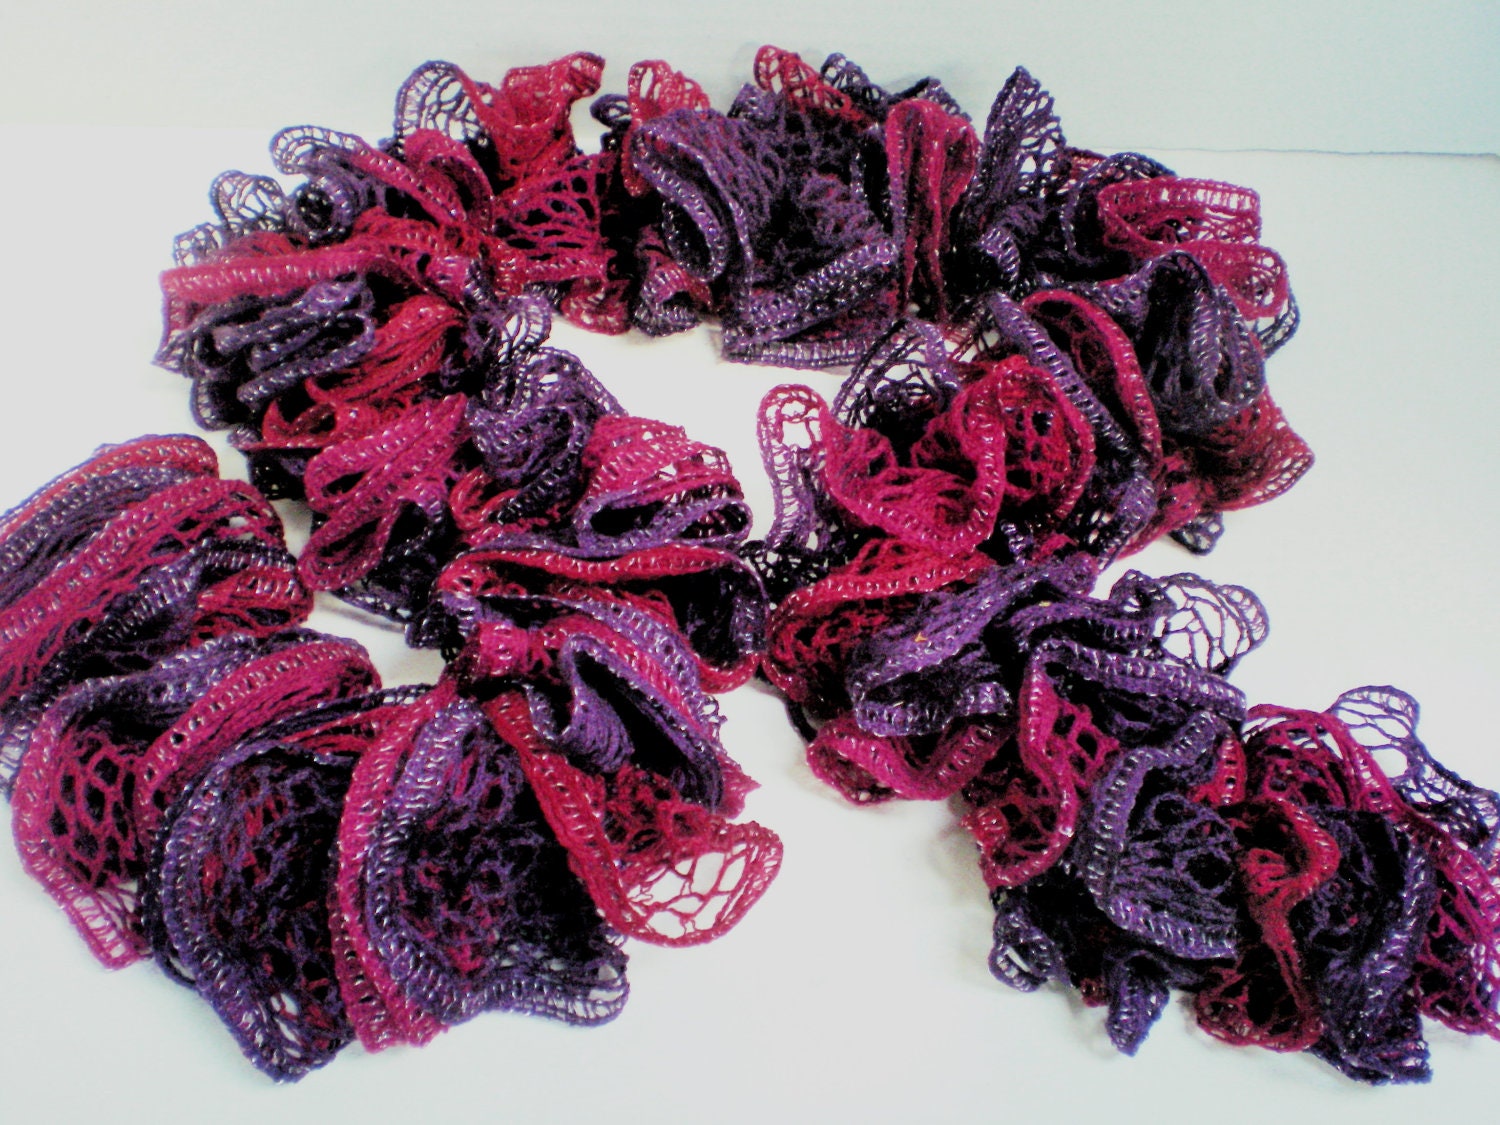 Lacy Layered Fashion Scarf, Knitted Lacy Scarf, Frilly Knitted Fashion Scarf